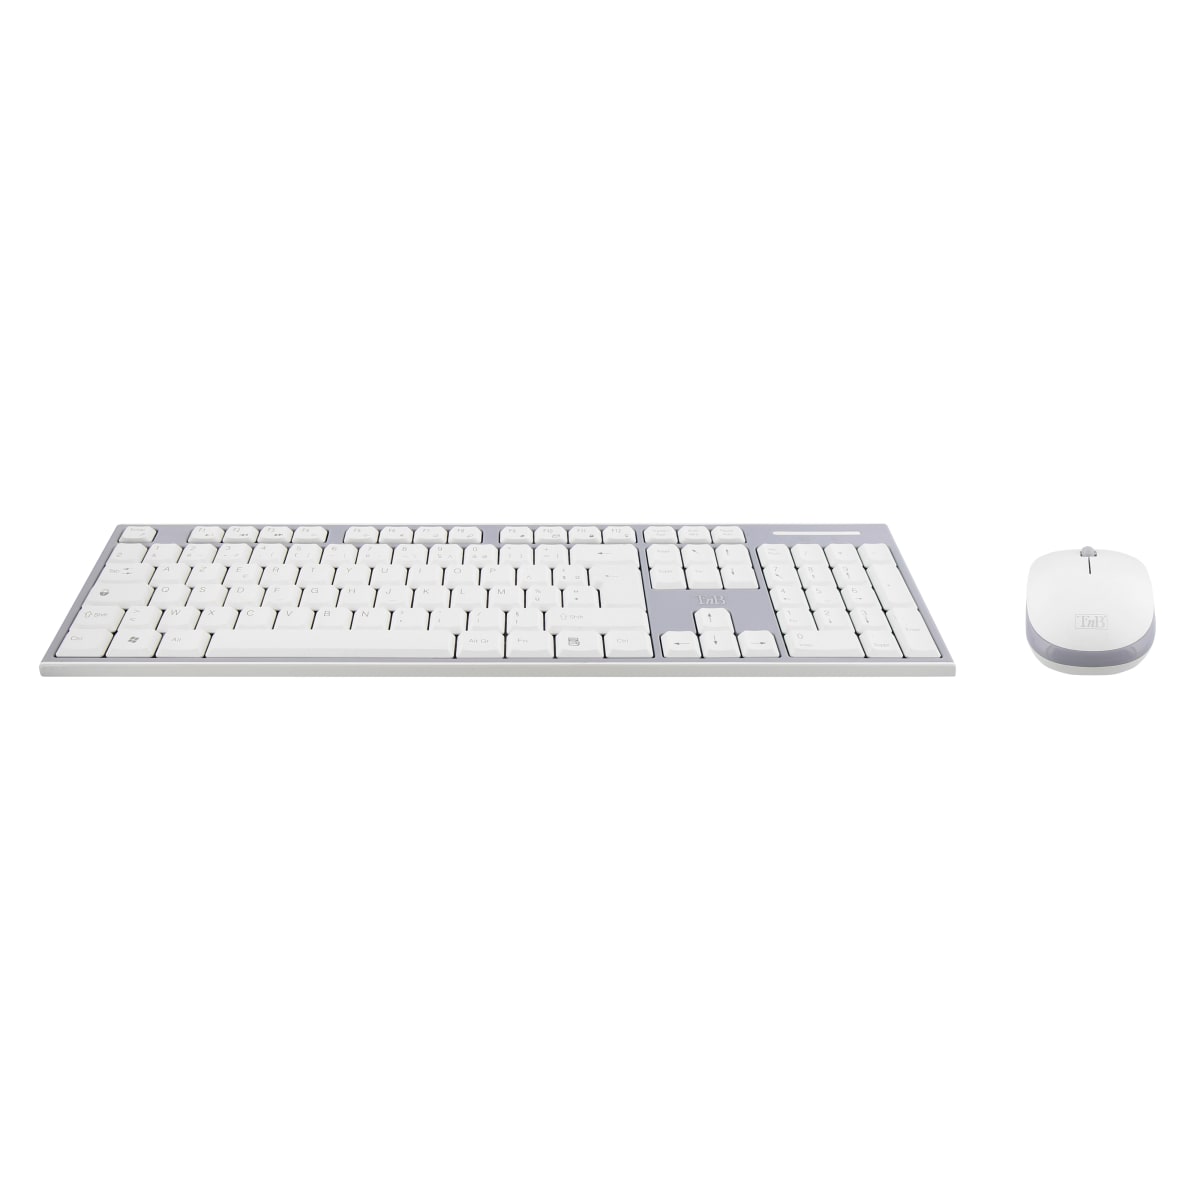 Protection clavier en silicone T'nB - T Nb